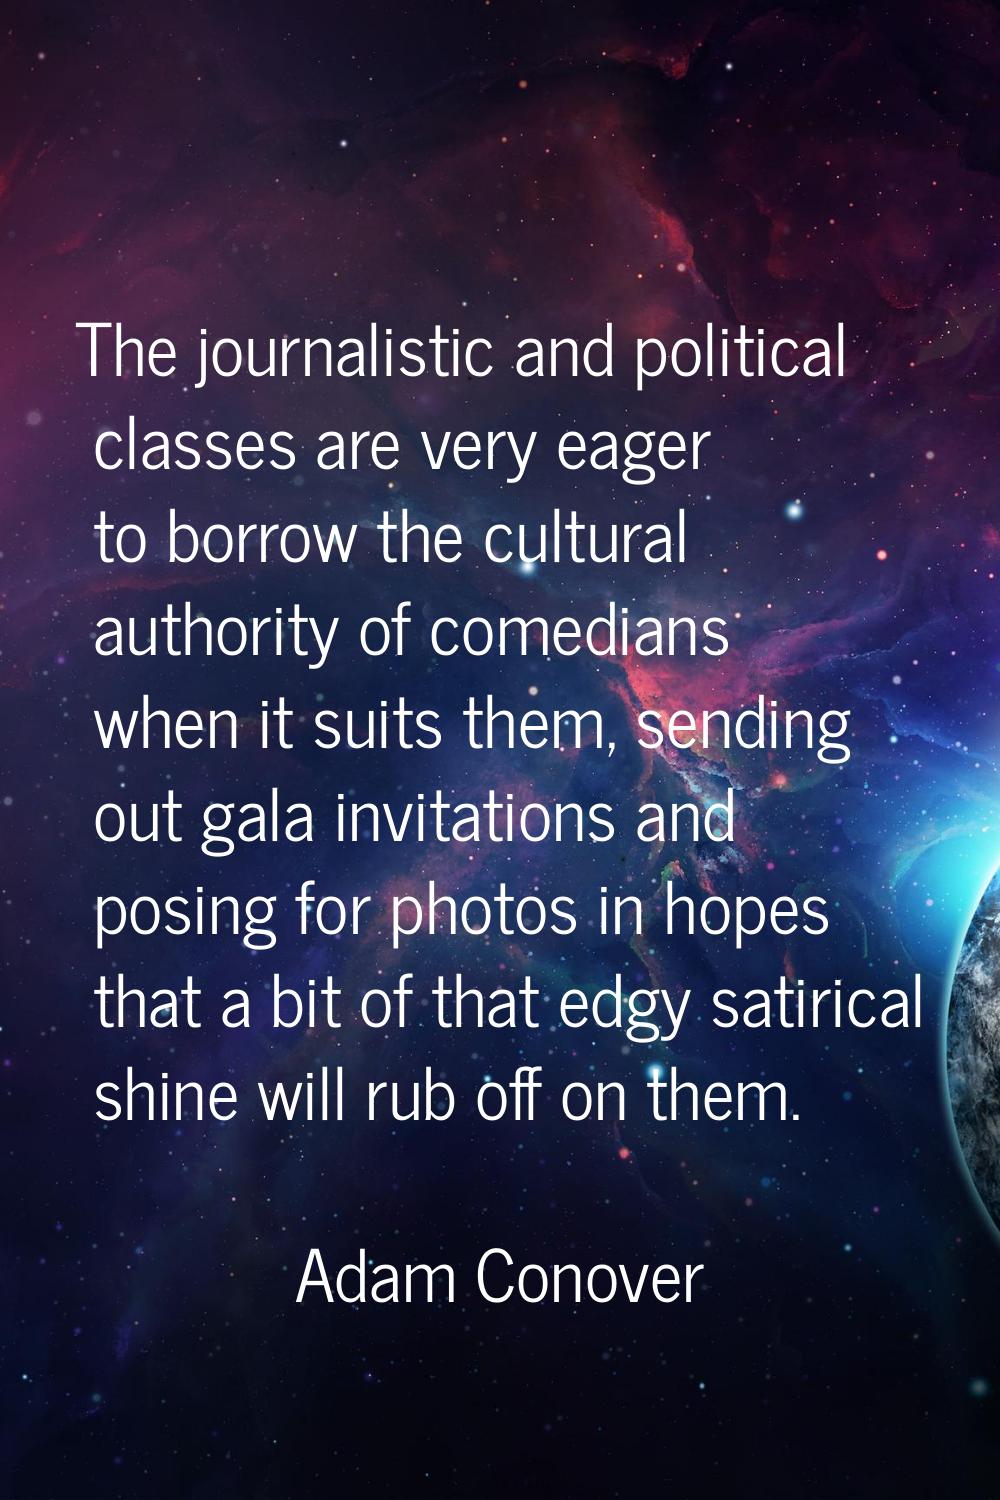 The journalistic and political classes are very eager to borrow the cultural authority of comedians